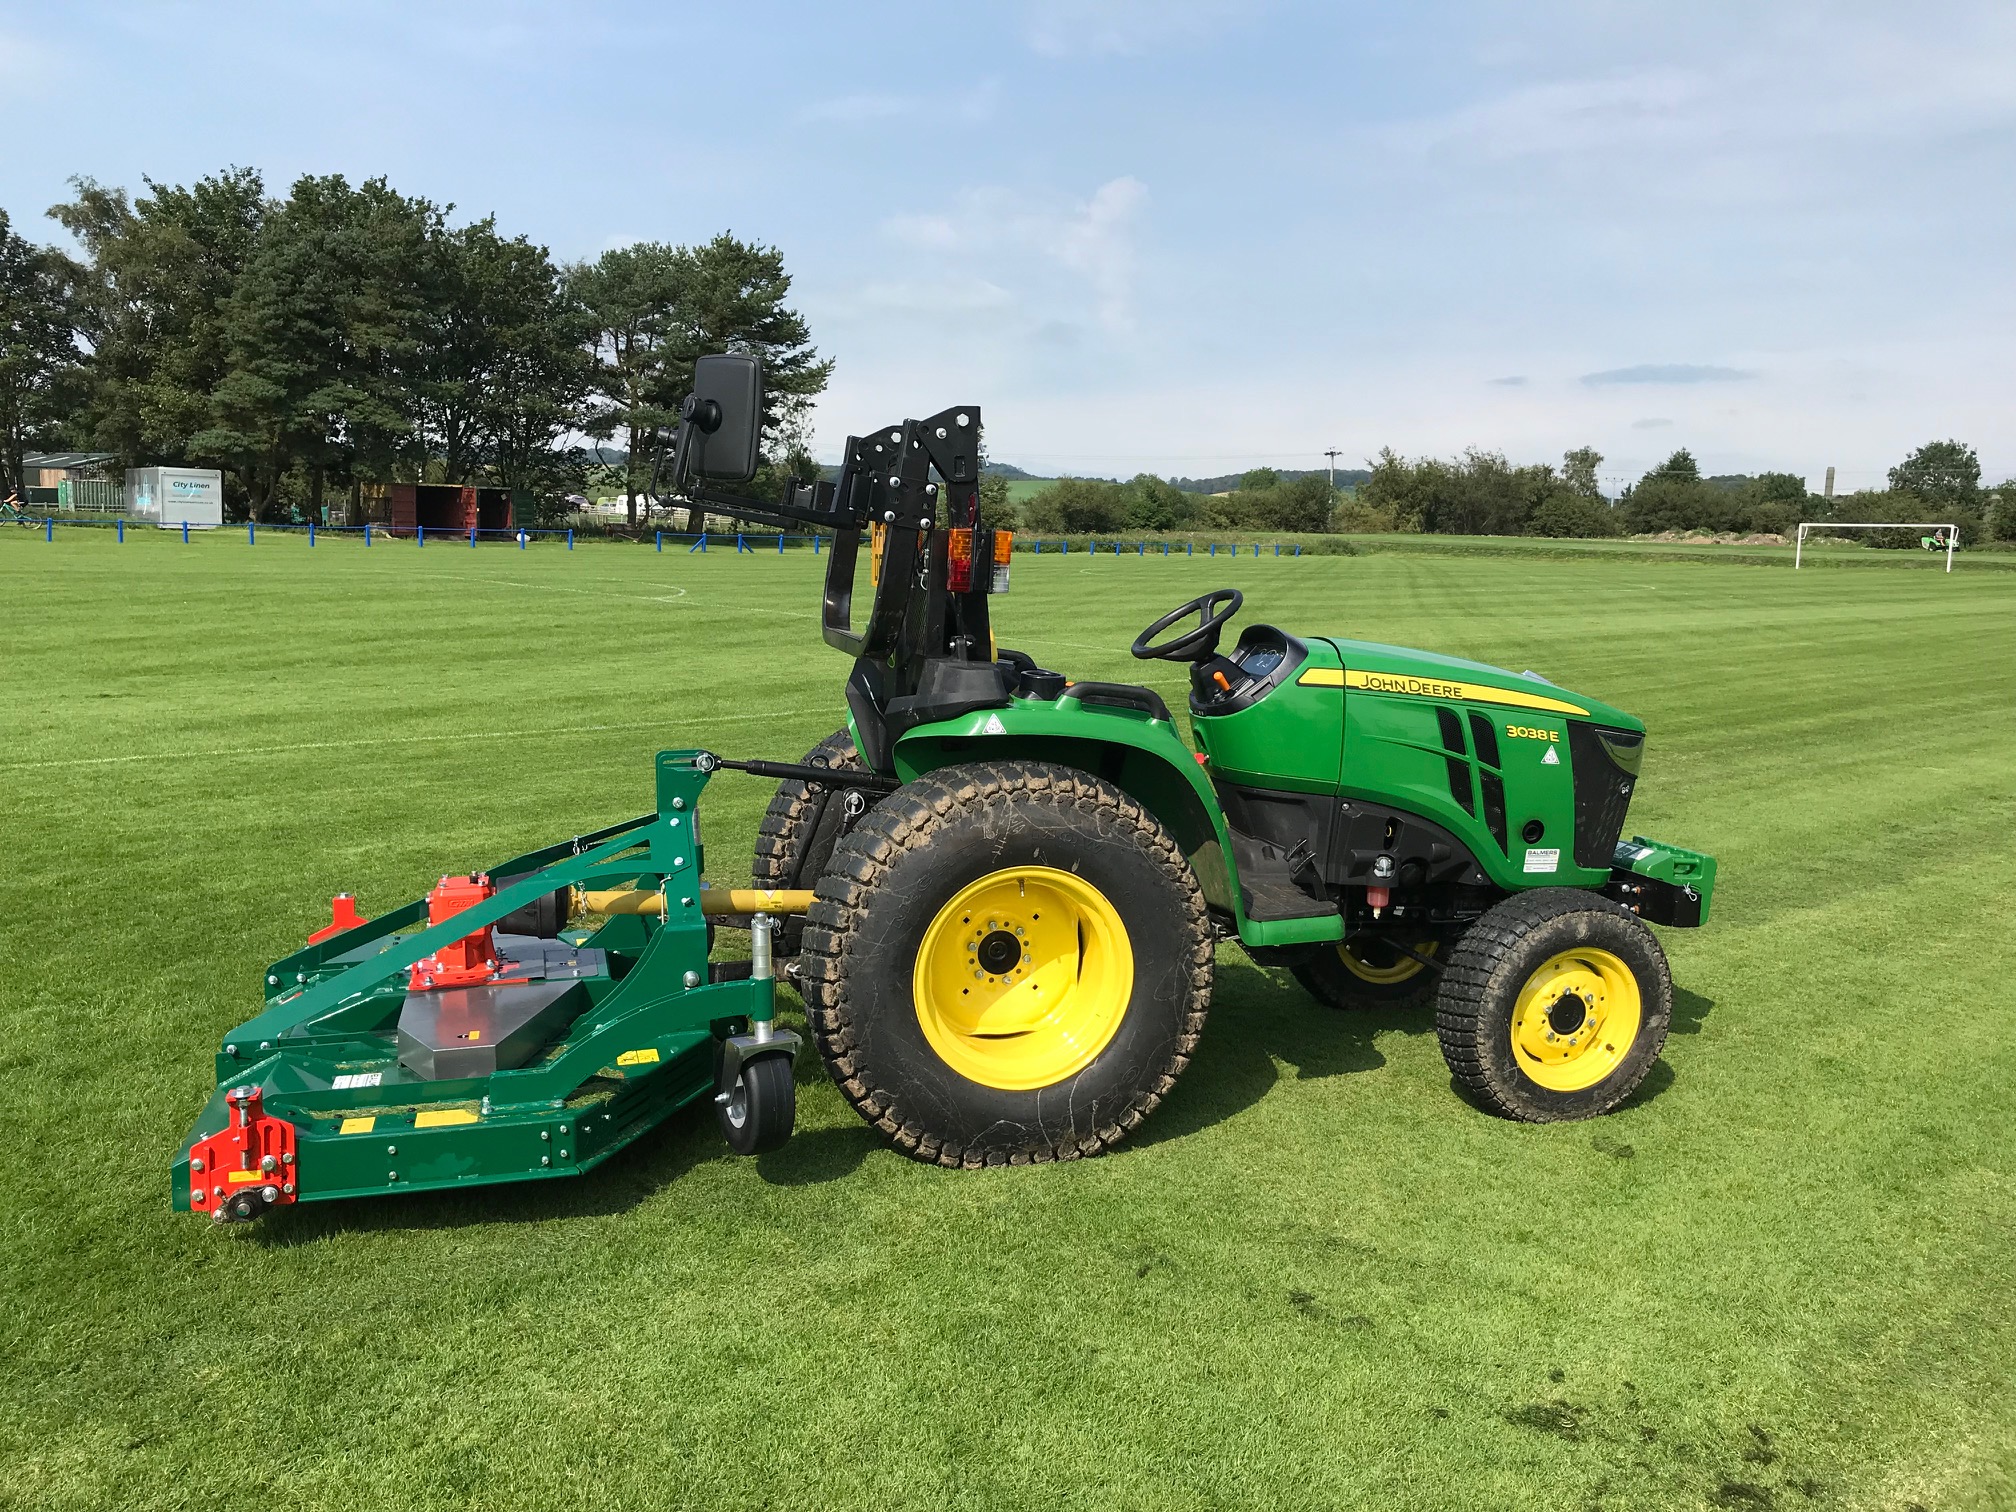 Wessex CRX 180 finishing roller mower